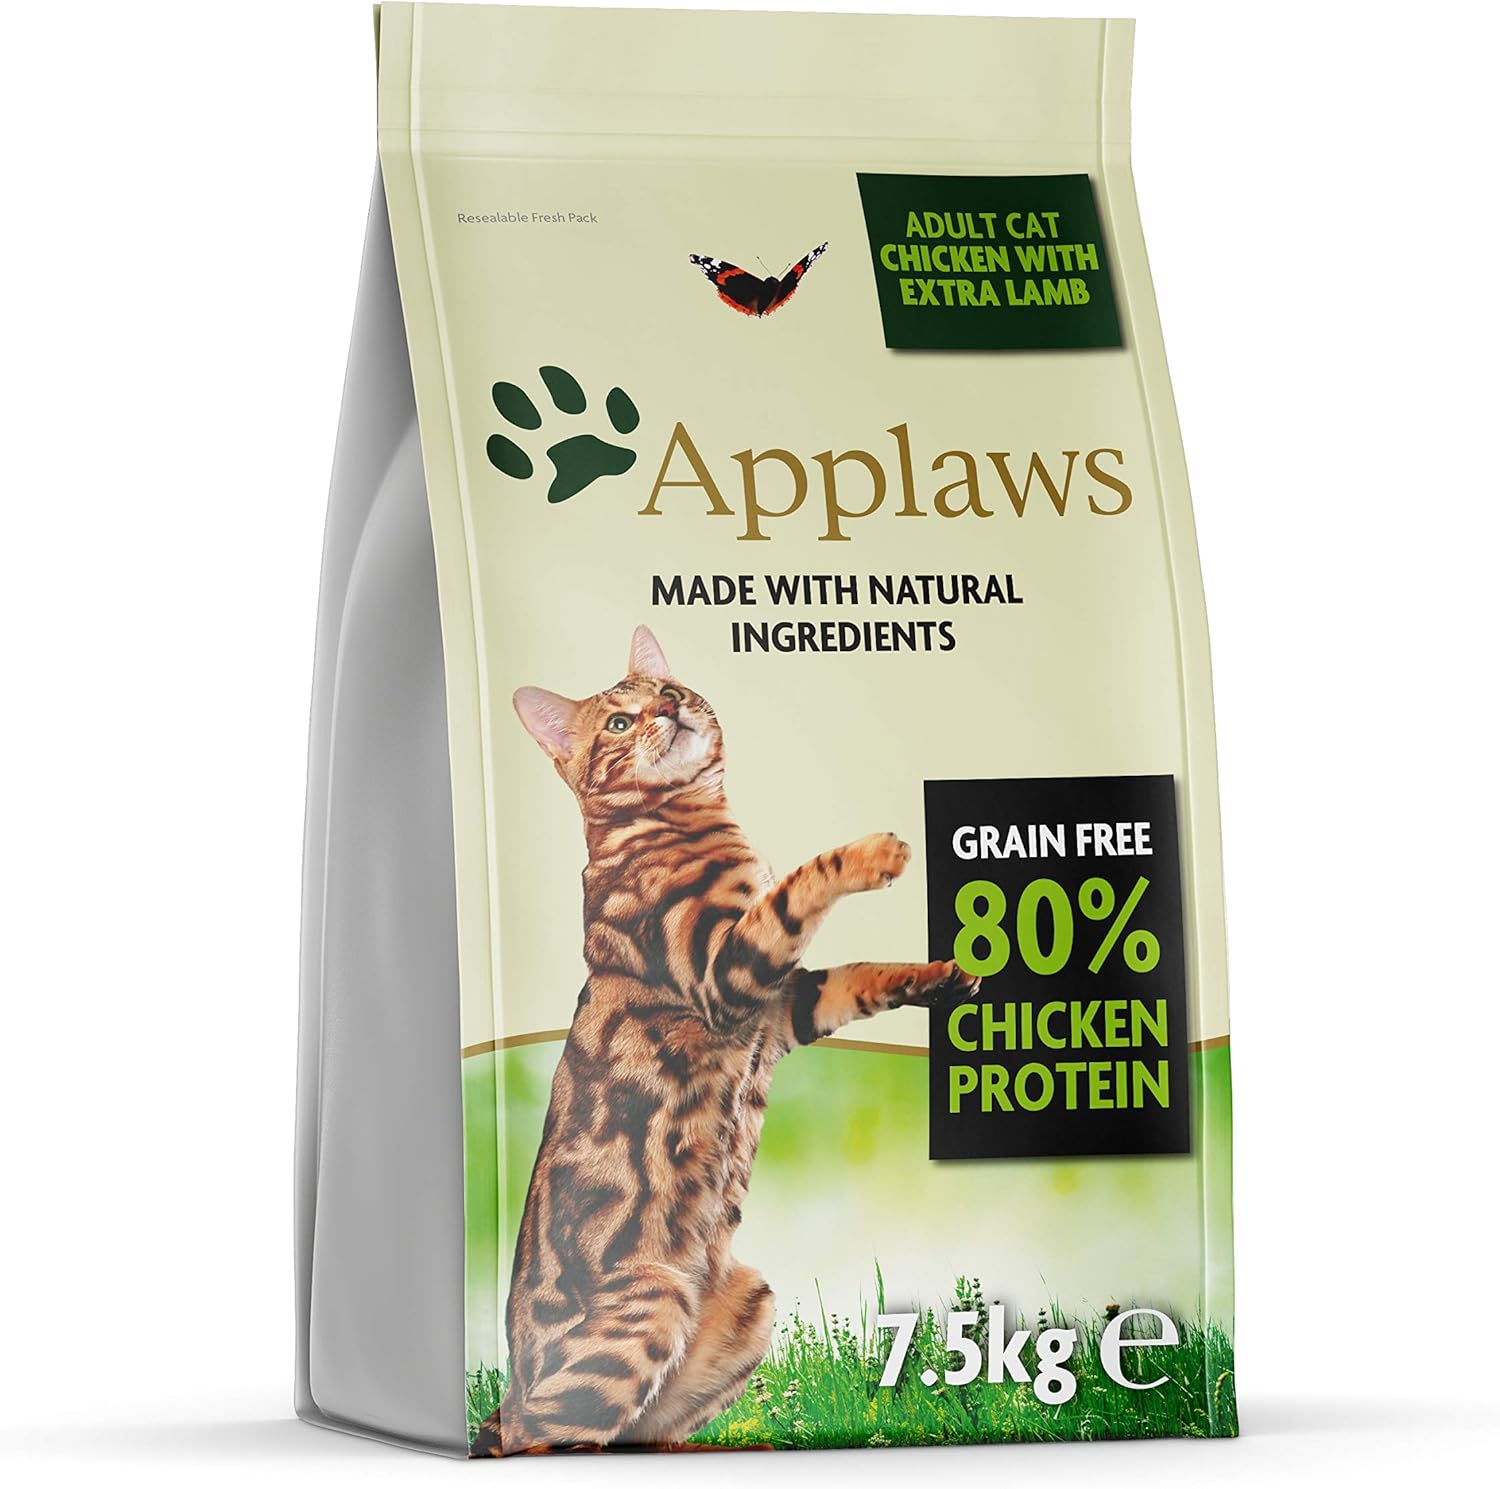 Applaws Complete and Grain Free Dry Adult Cat Food, Chicken with Lamb 7.5 kg Bag?9103309